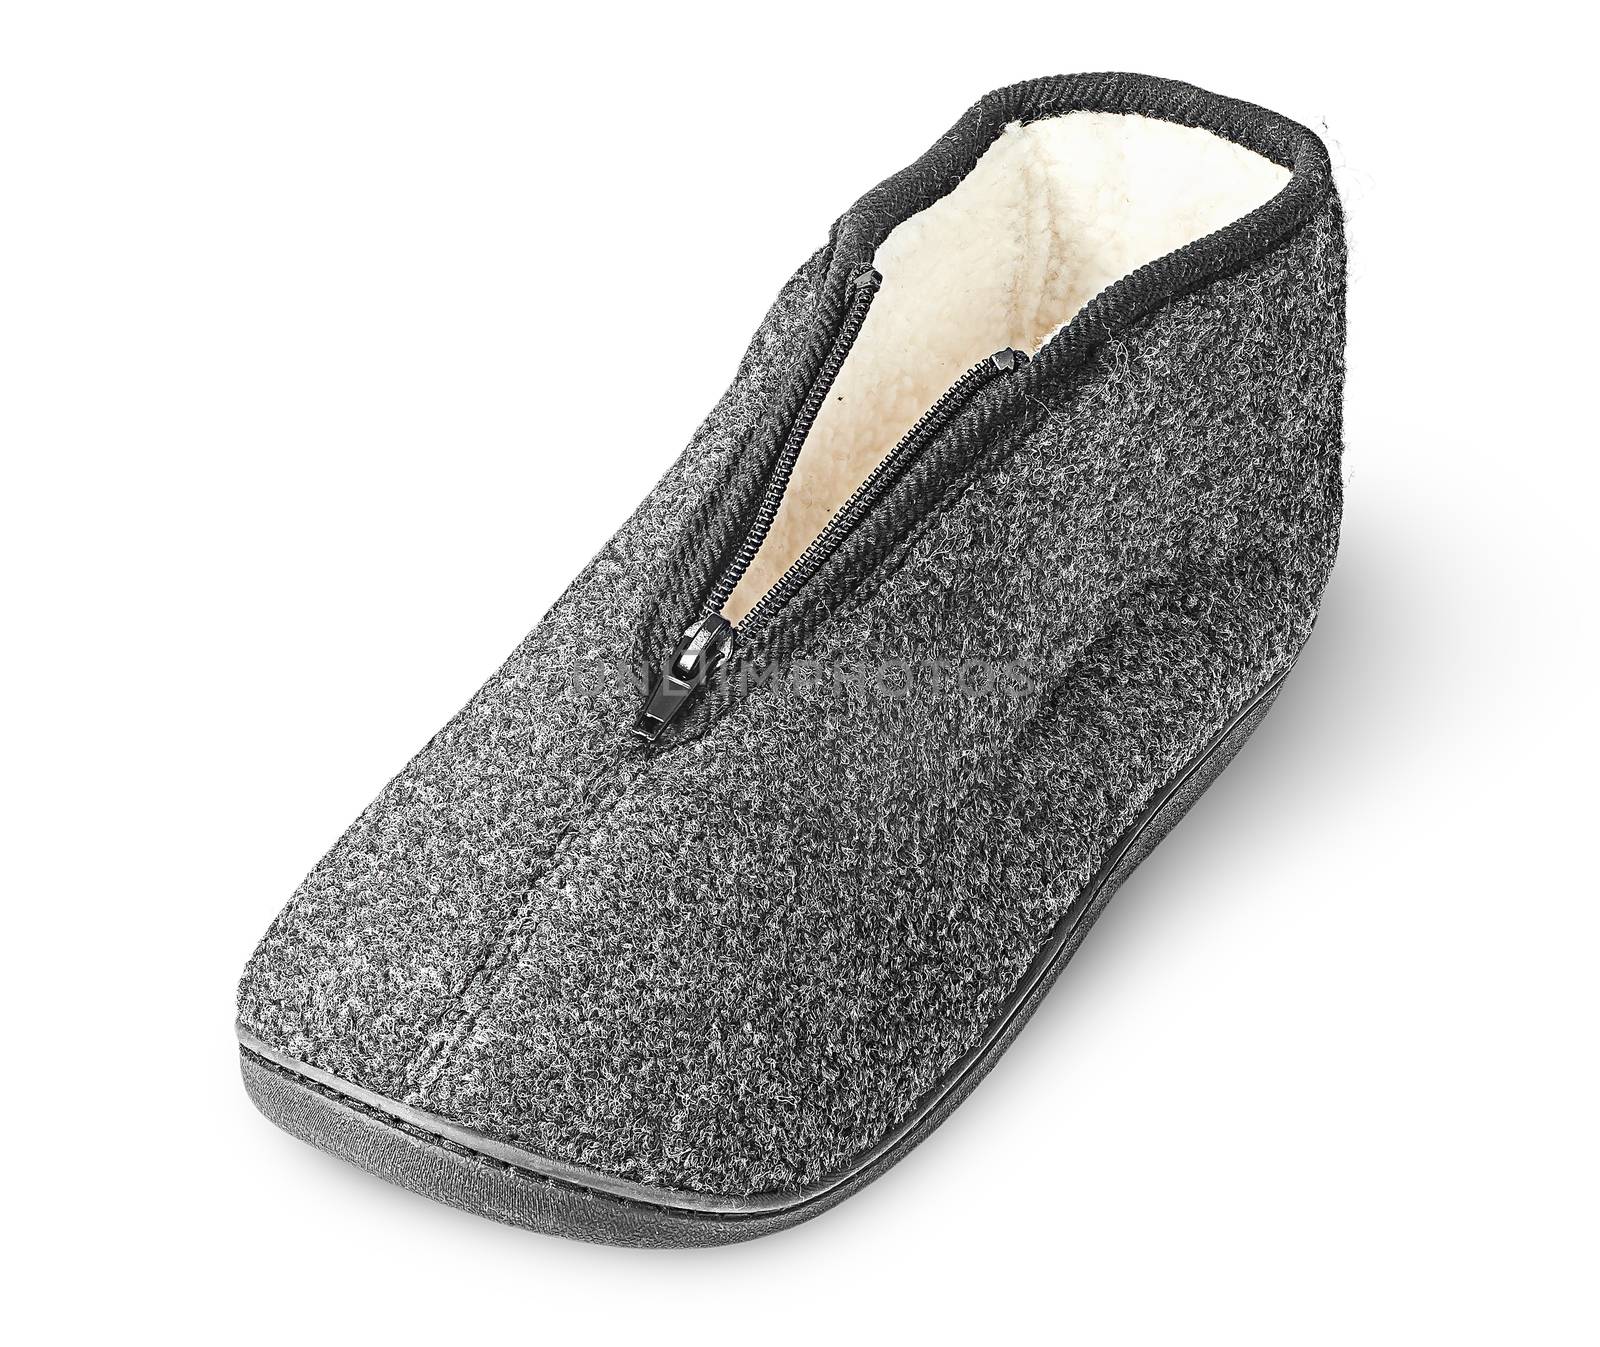 One piece the comfortable dark gray slipper by Cipariss